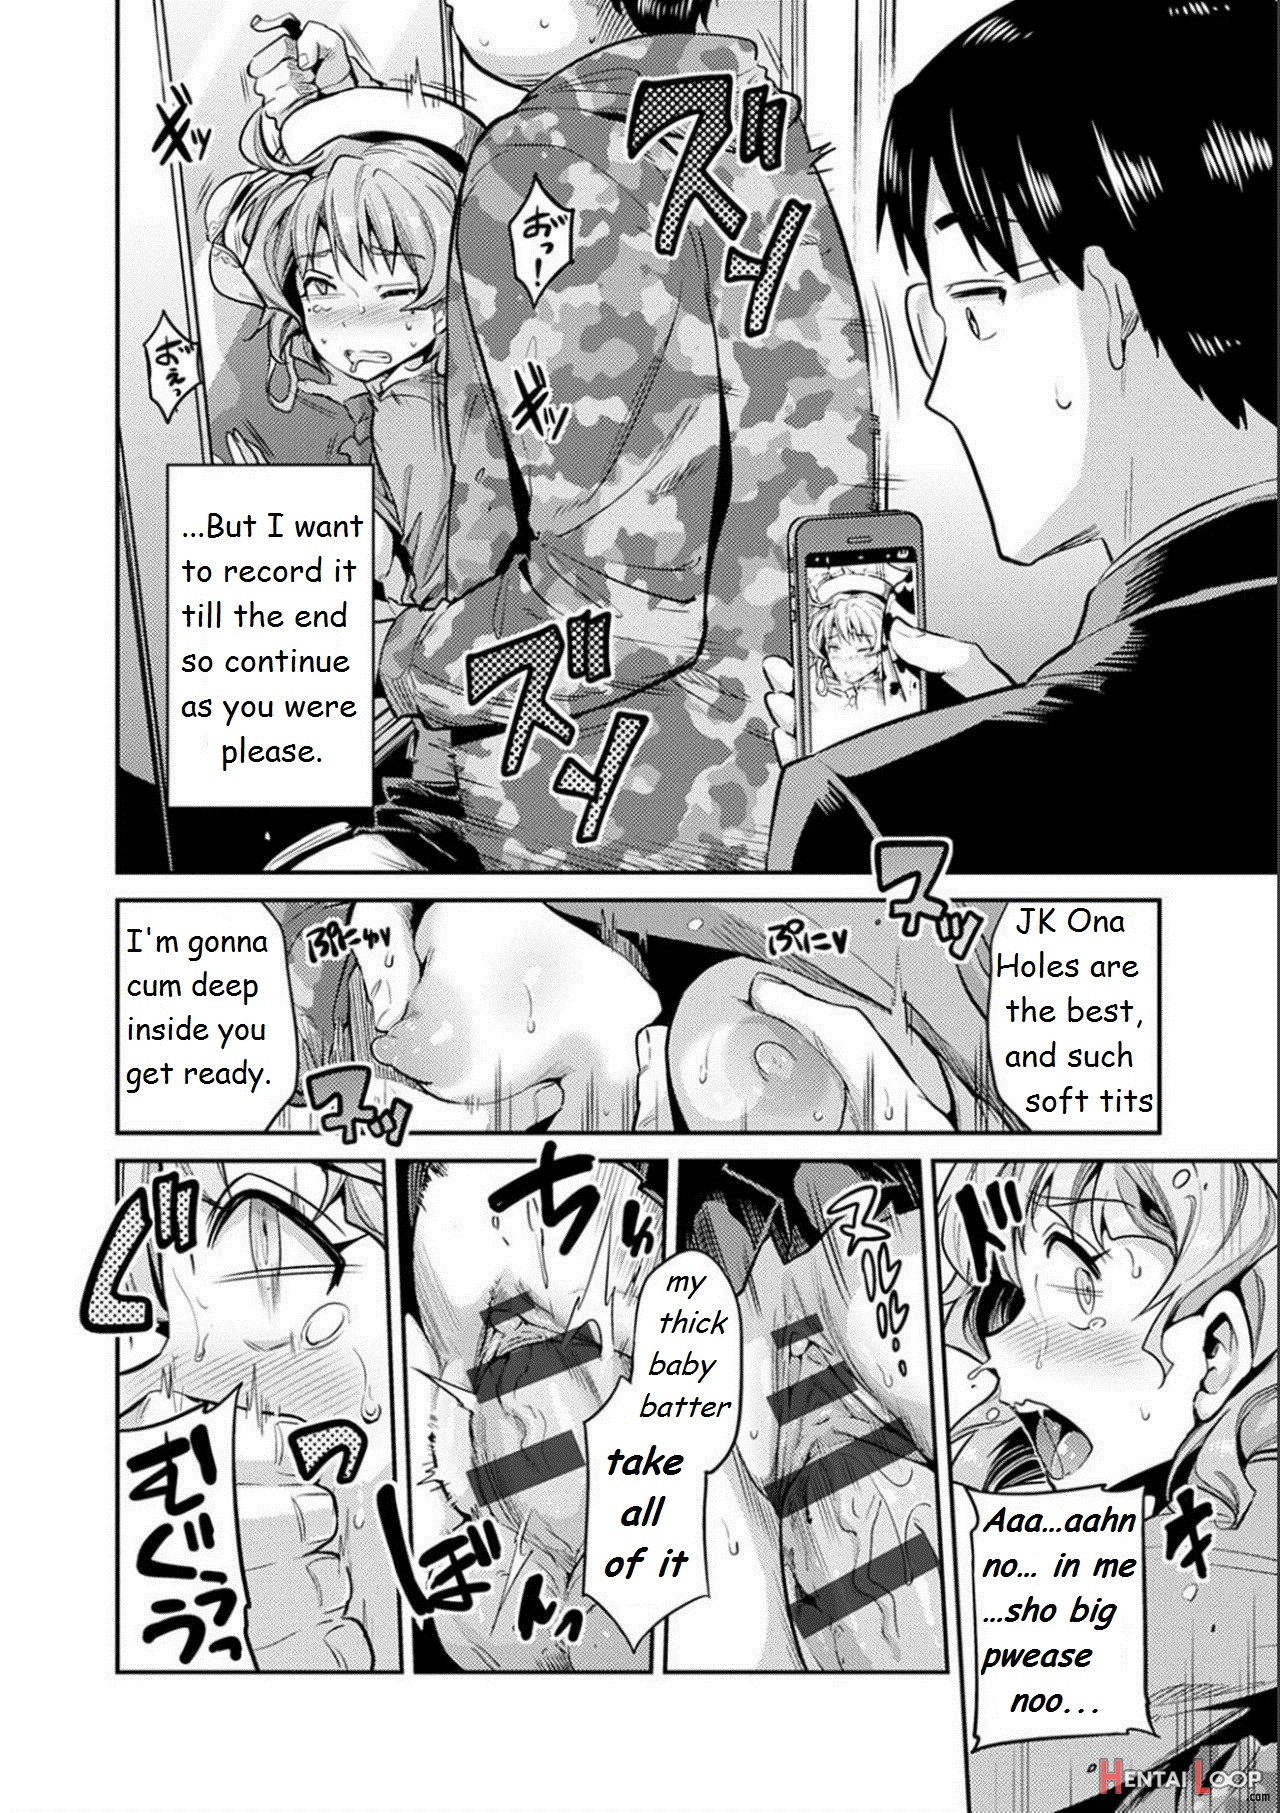 The Girl Who Cried Molester Kyousei Tanetsuke Express - Forced Seeding Express 1st Story page 13